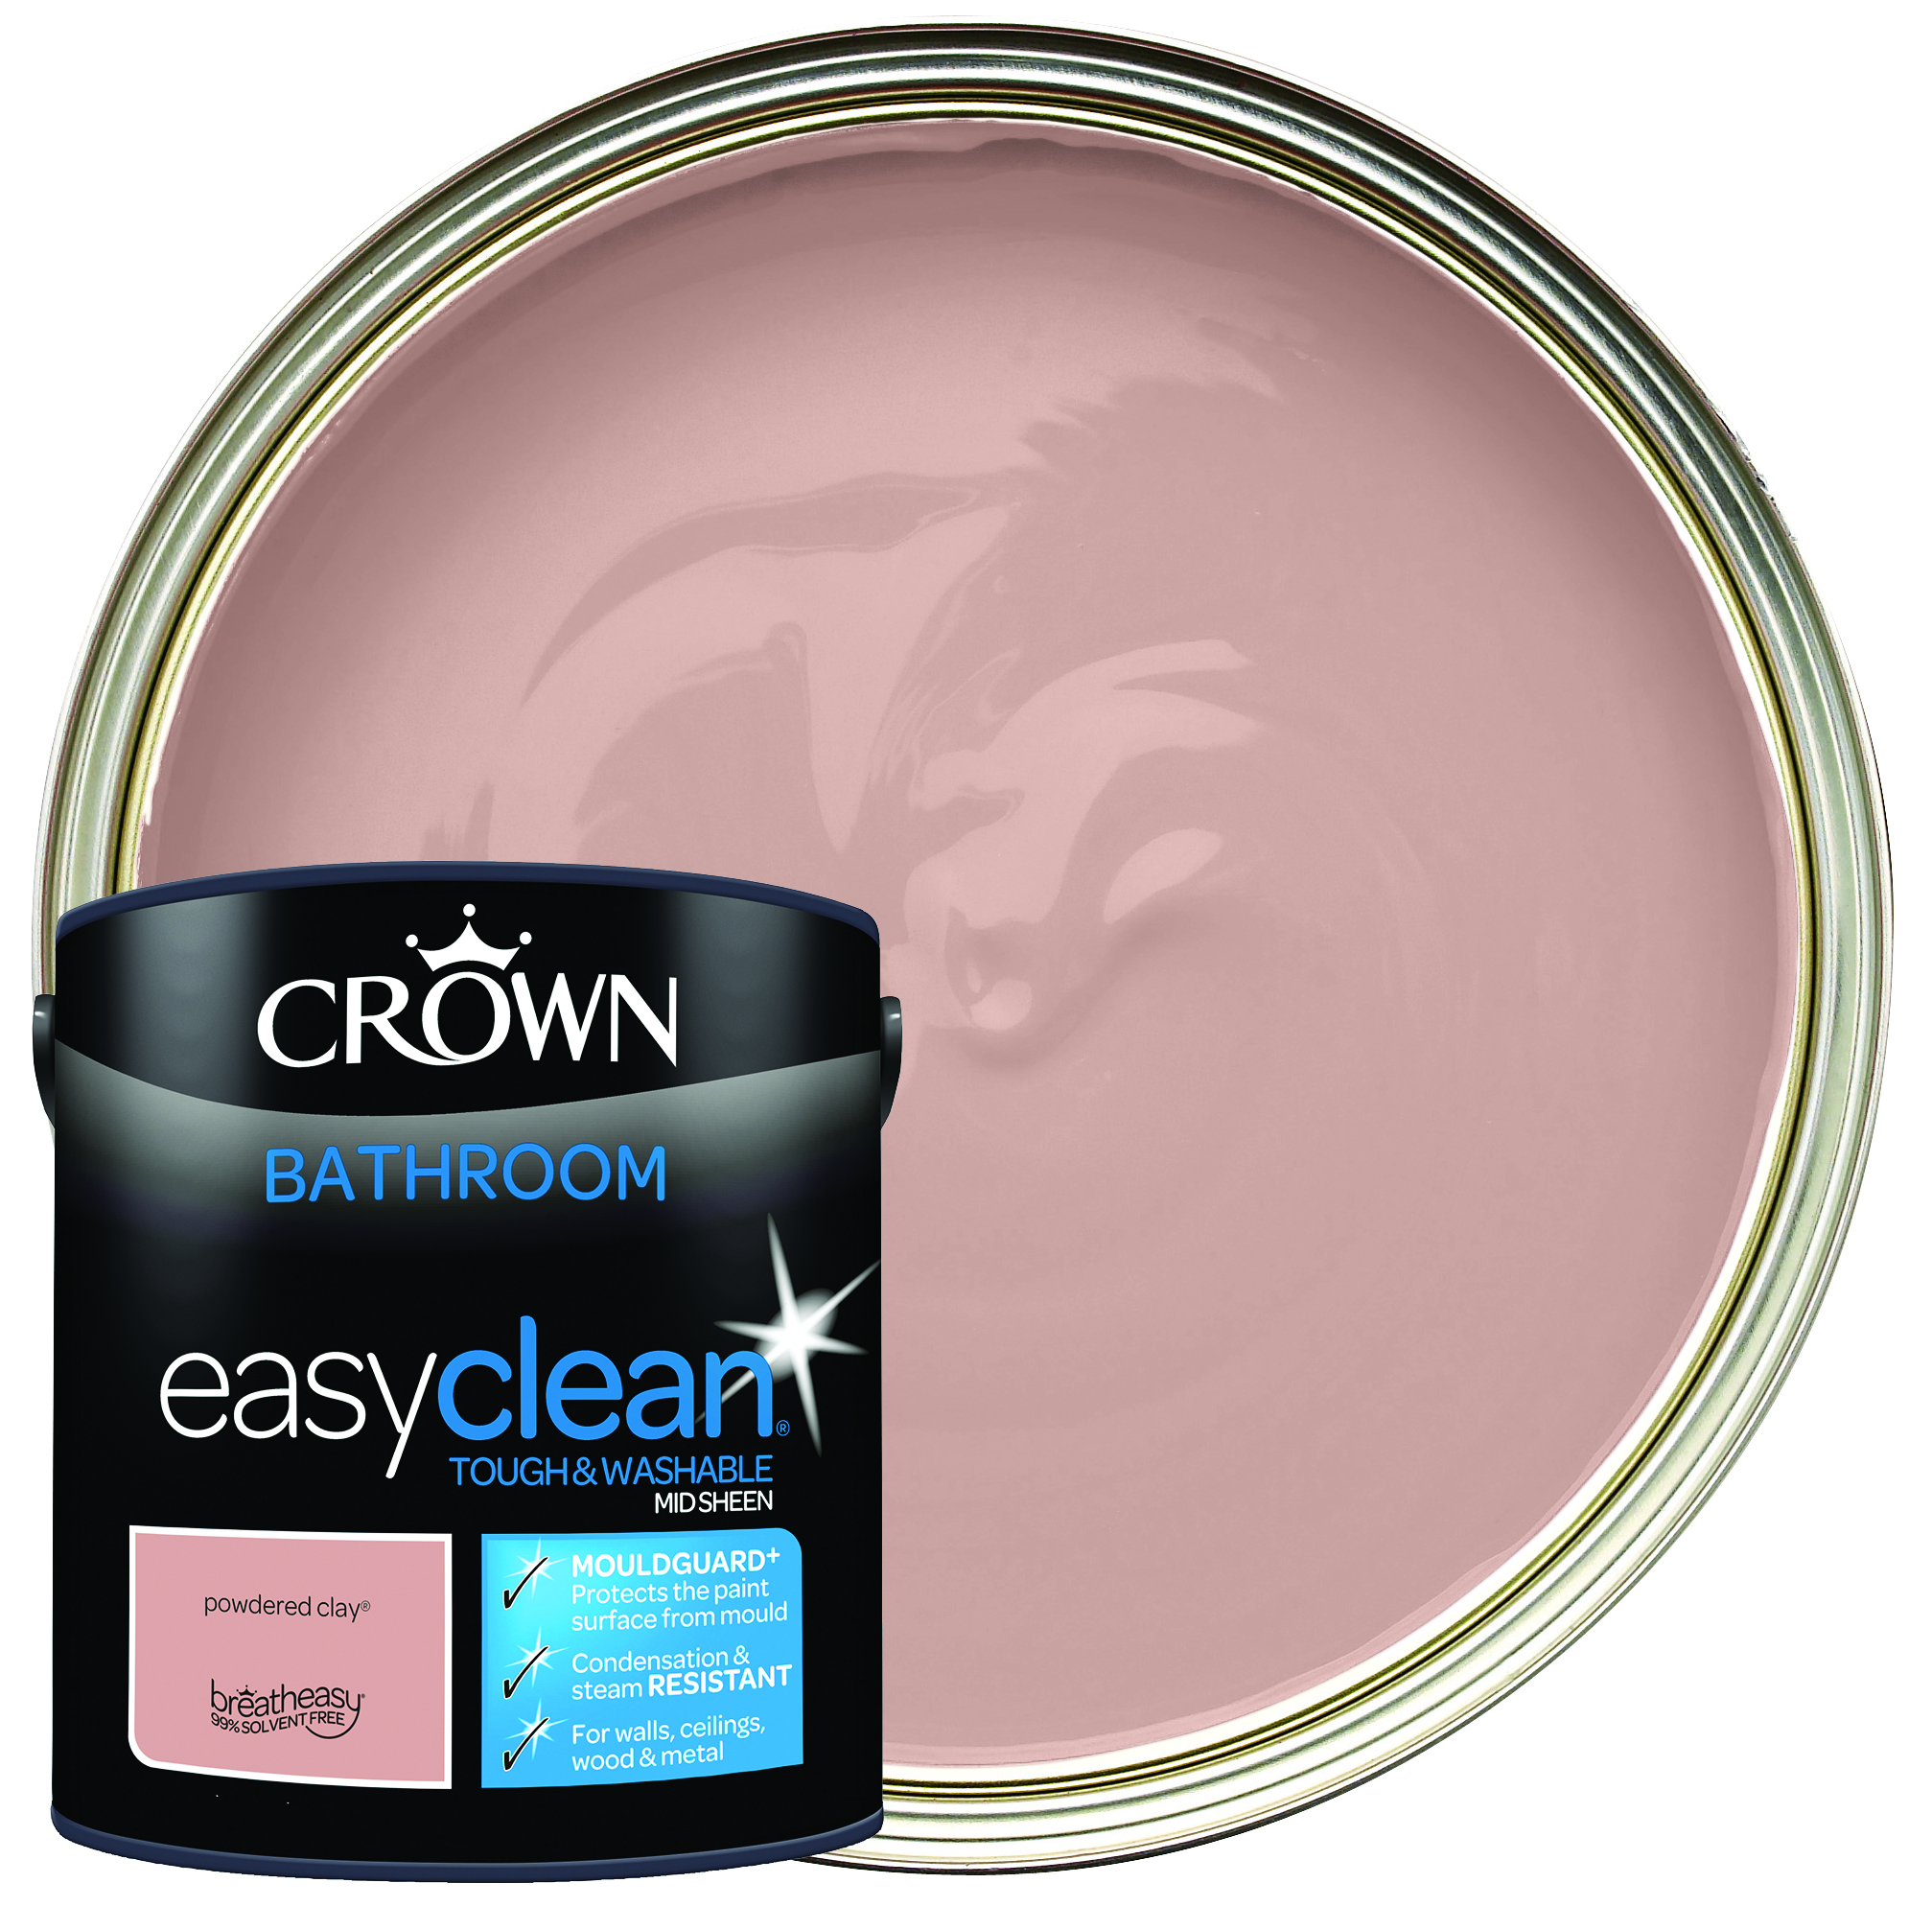 Image of Crown Easyclean Mid Sheen Emulsion Bathroom Paint - Powdered Clay - 2.5L